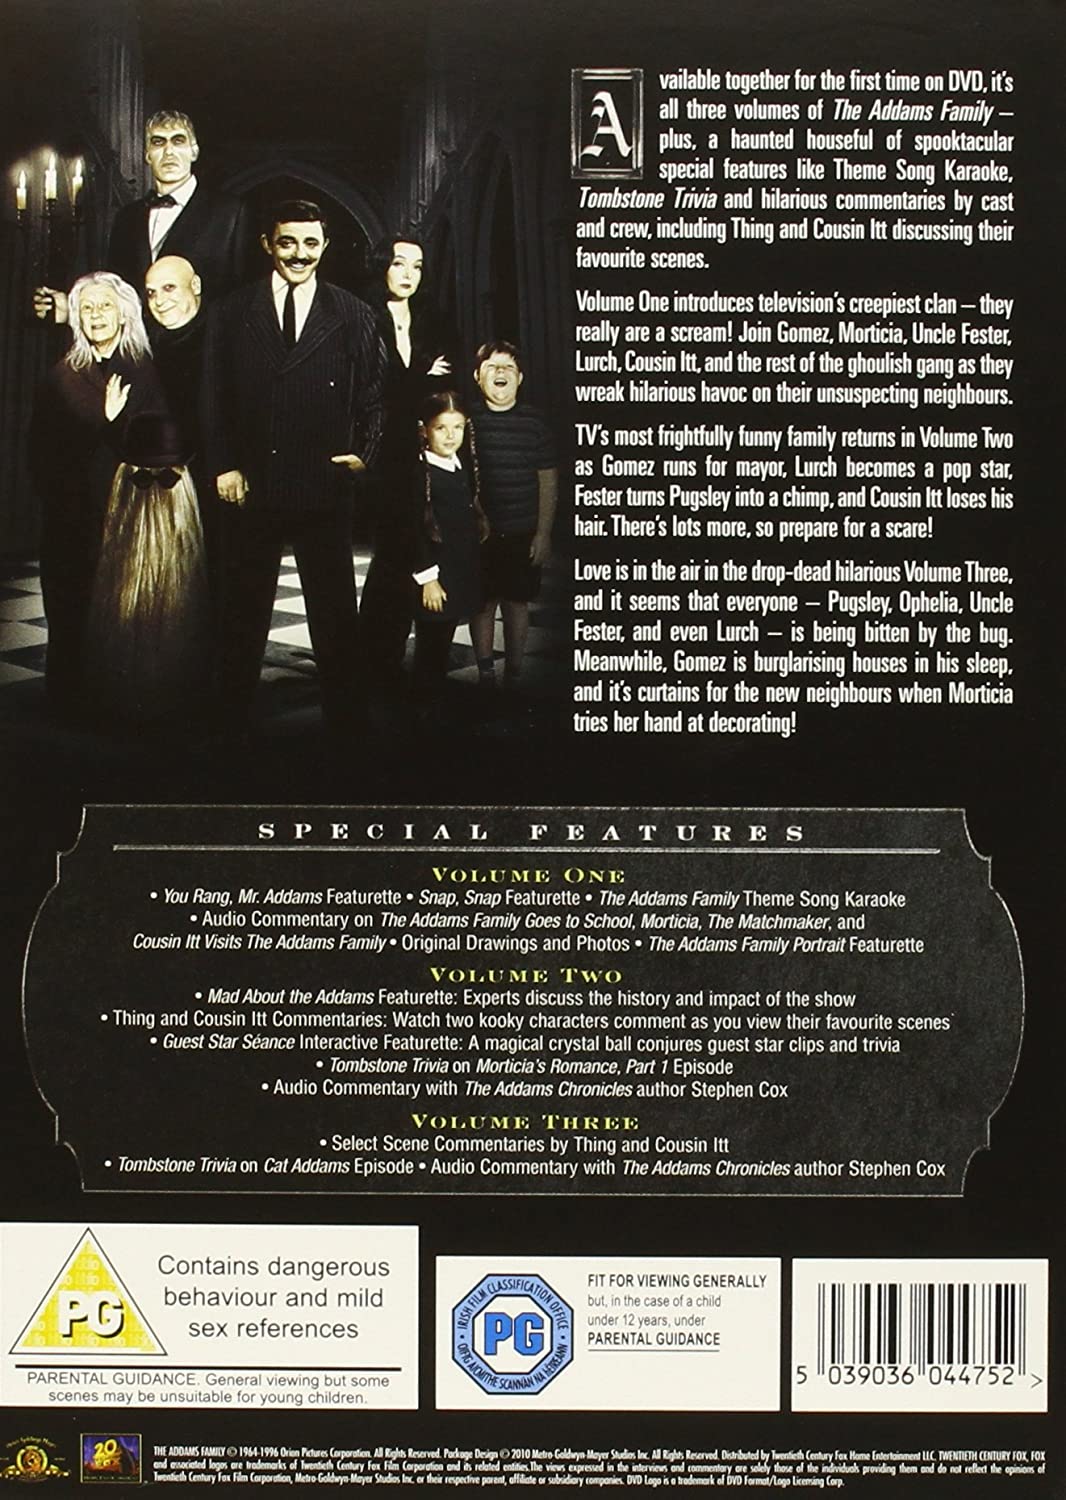 The Addams Family: The Complete Series - Family/Comedy [DVD]